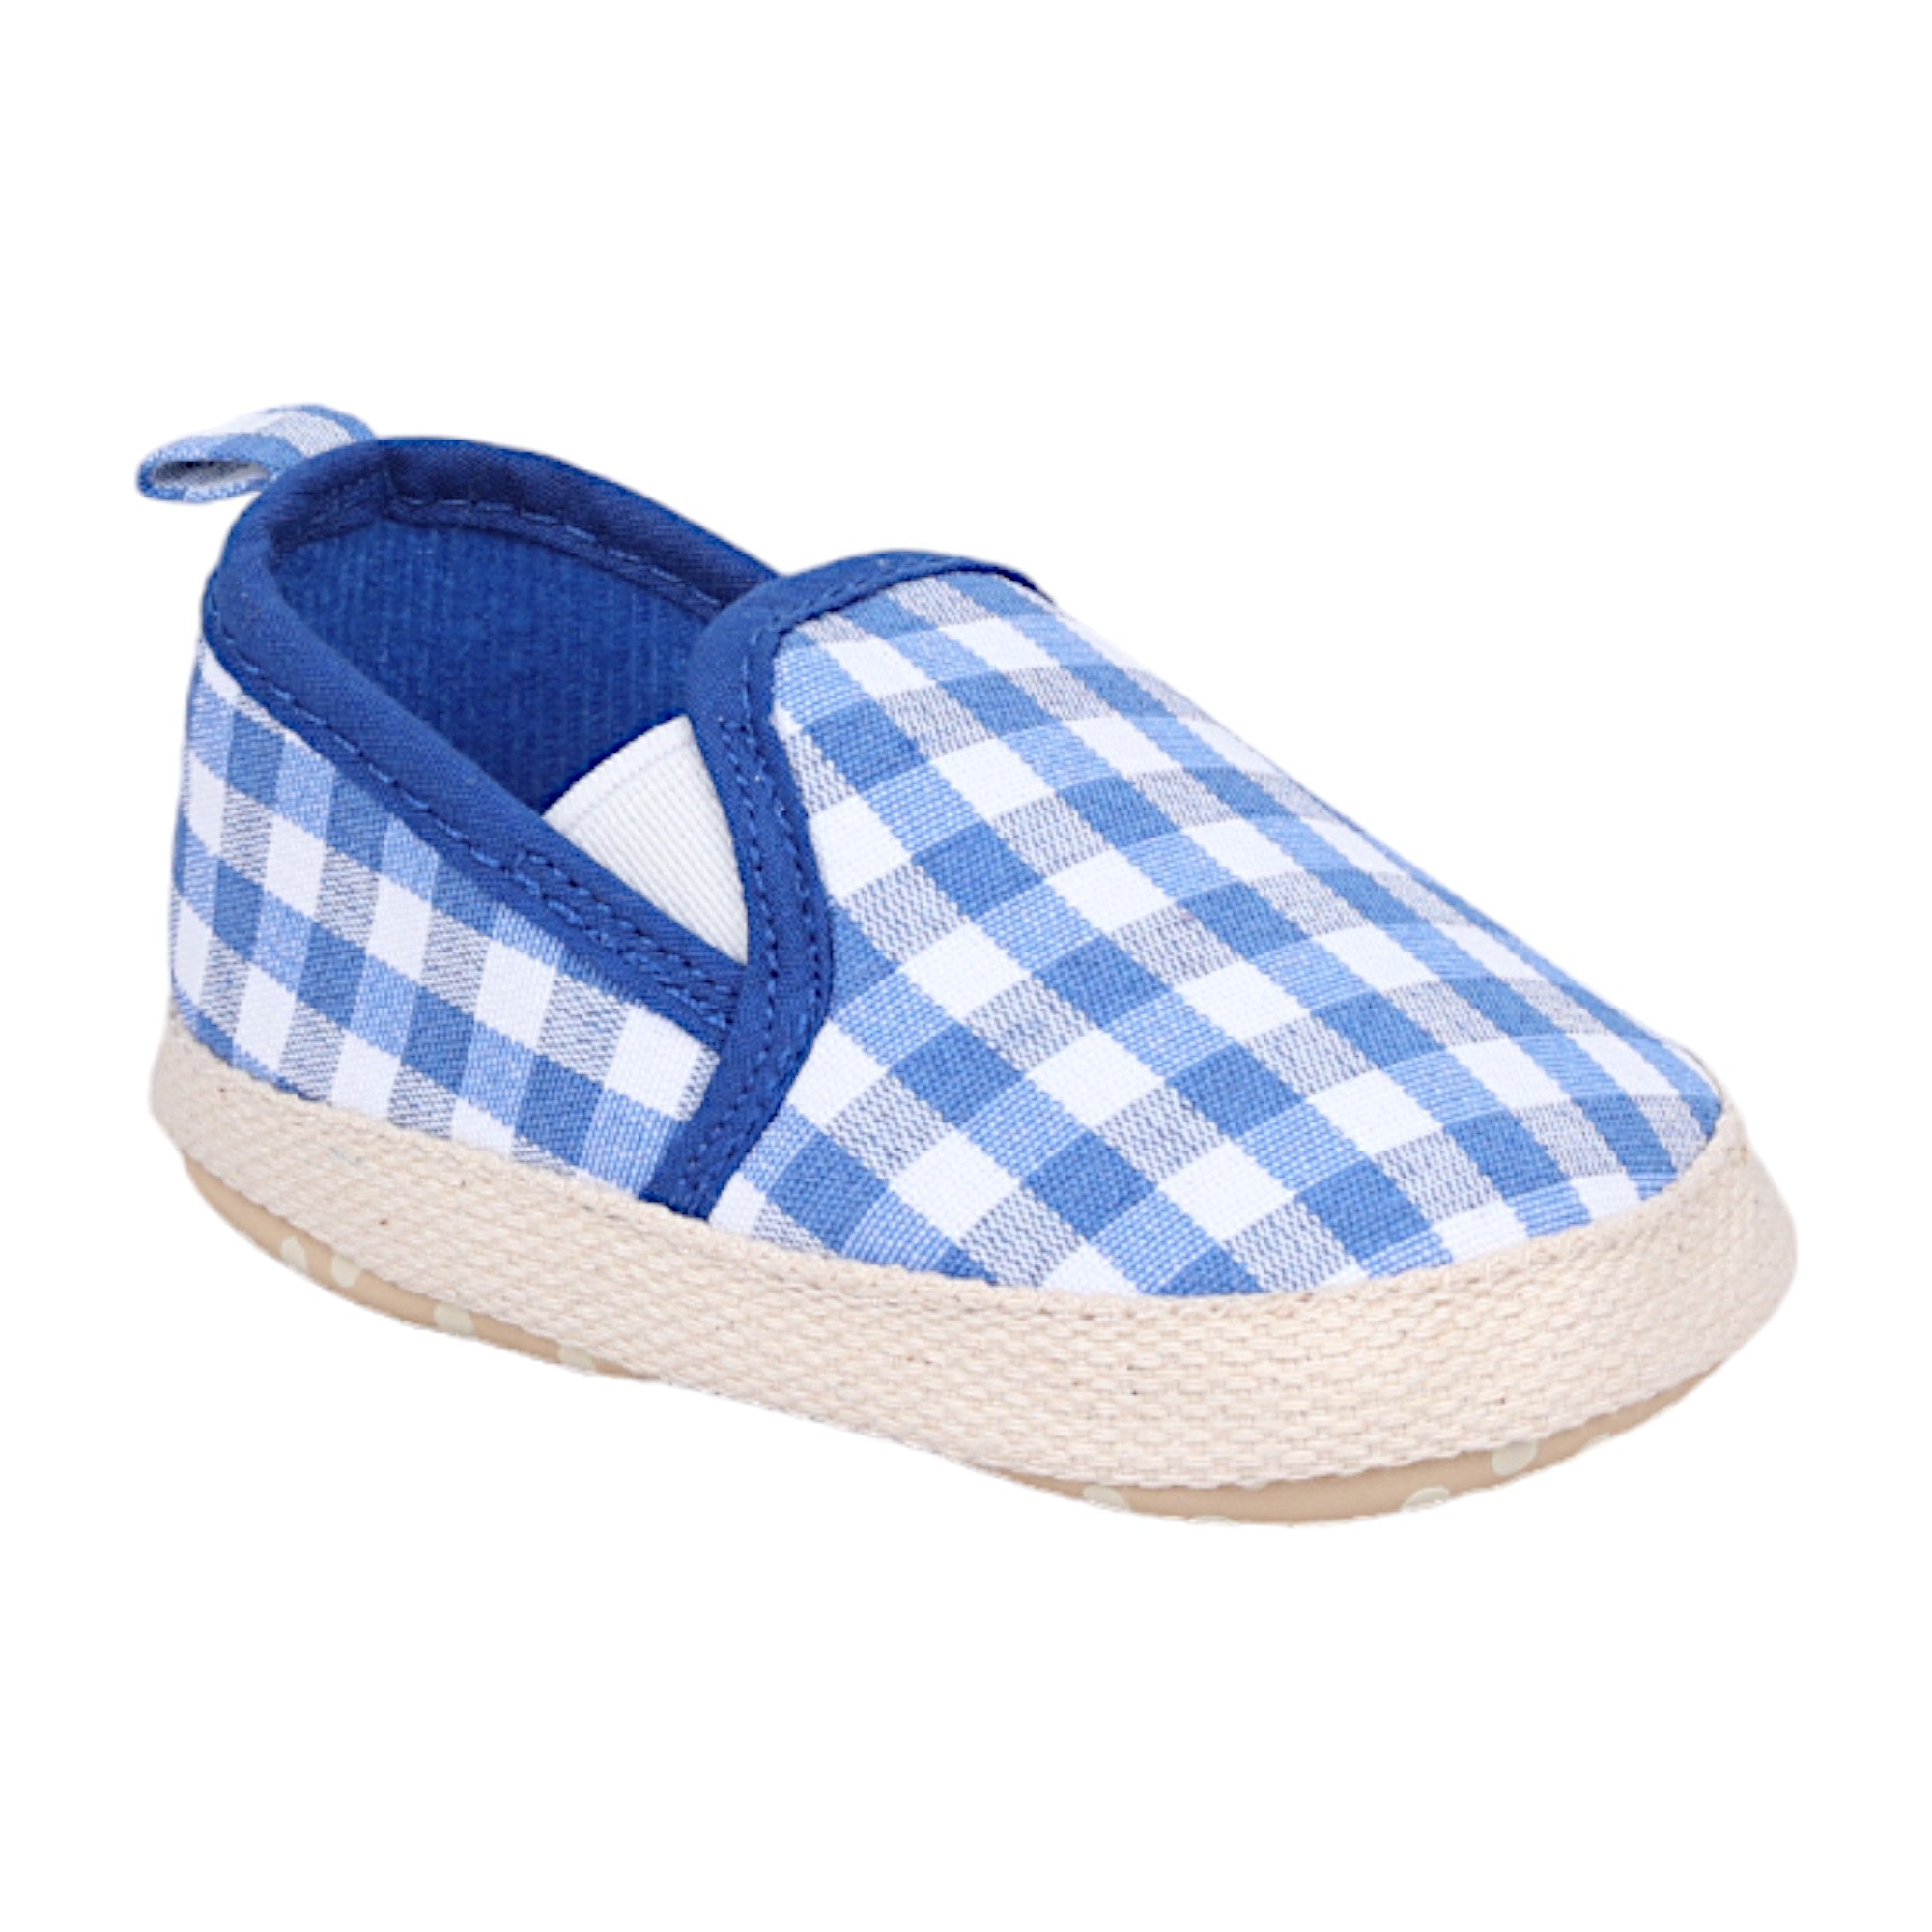 Baby Moo Classic Checkerboard Comfortable Slip-On Anti-Skid Canvas Sneakers - Blue